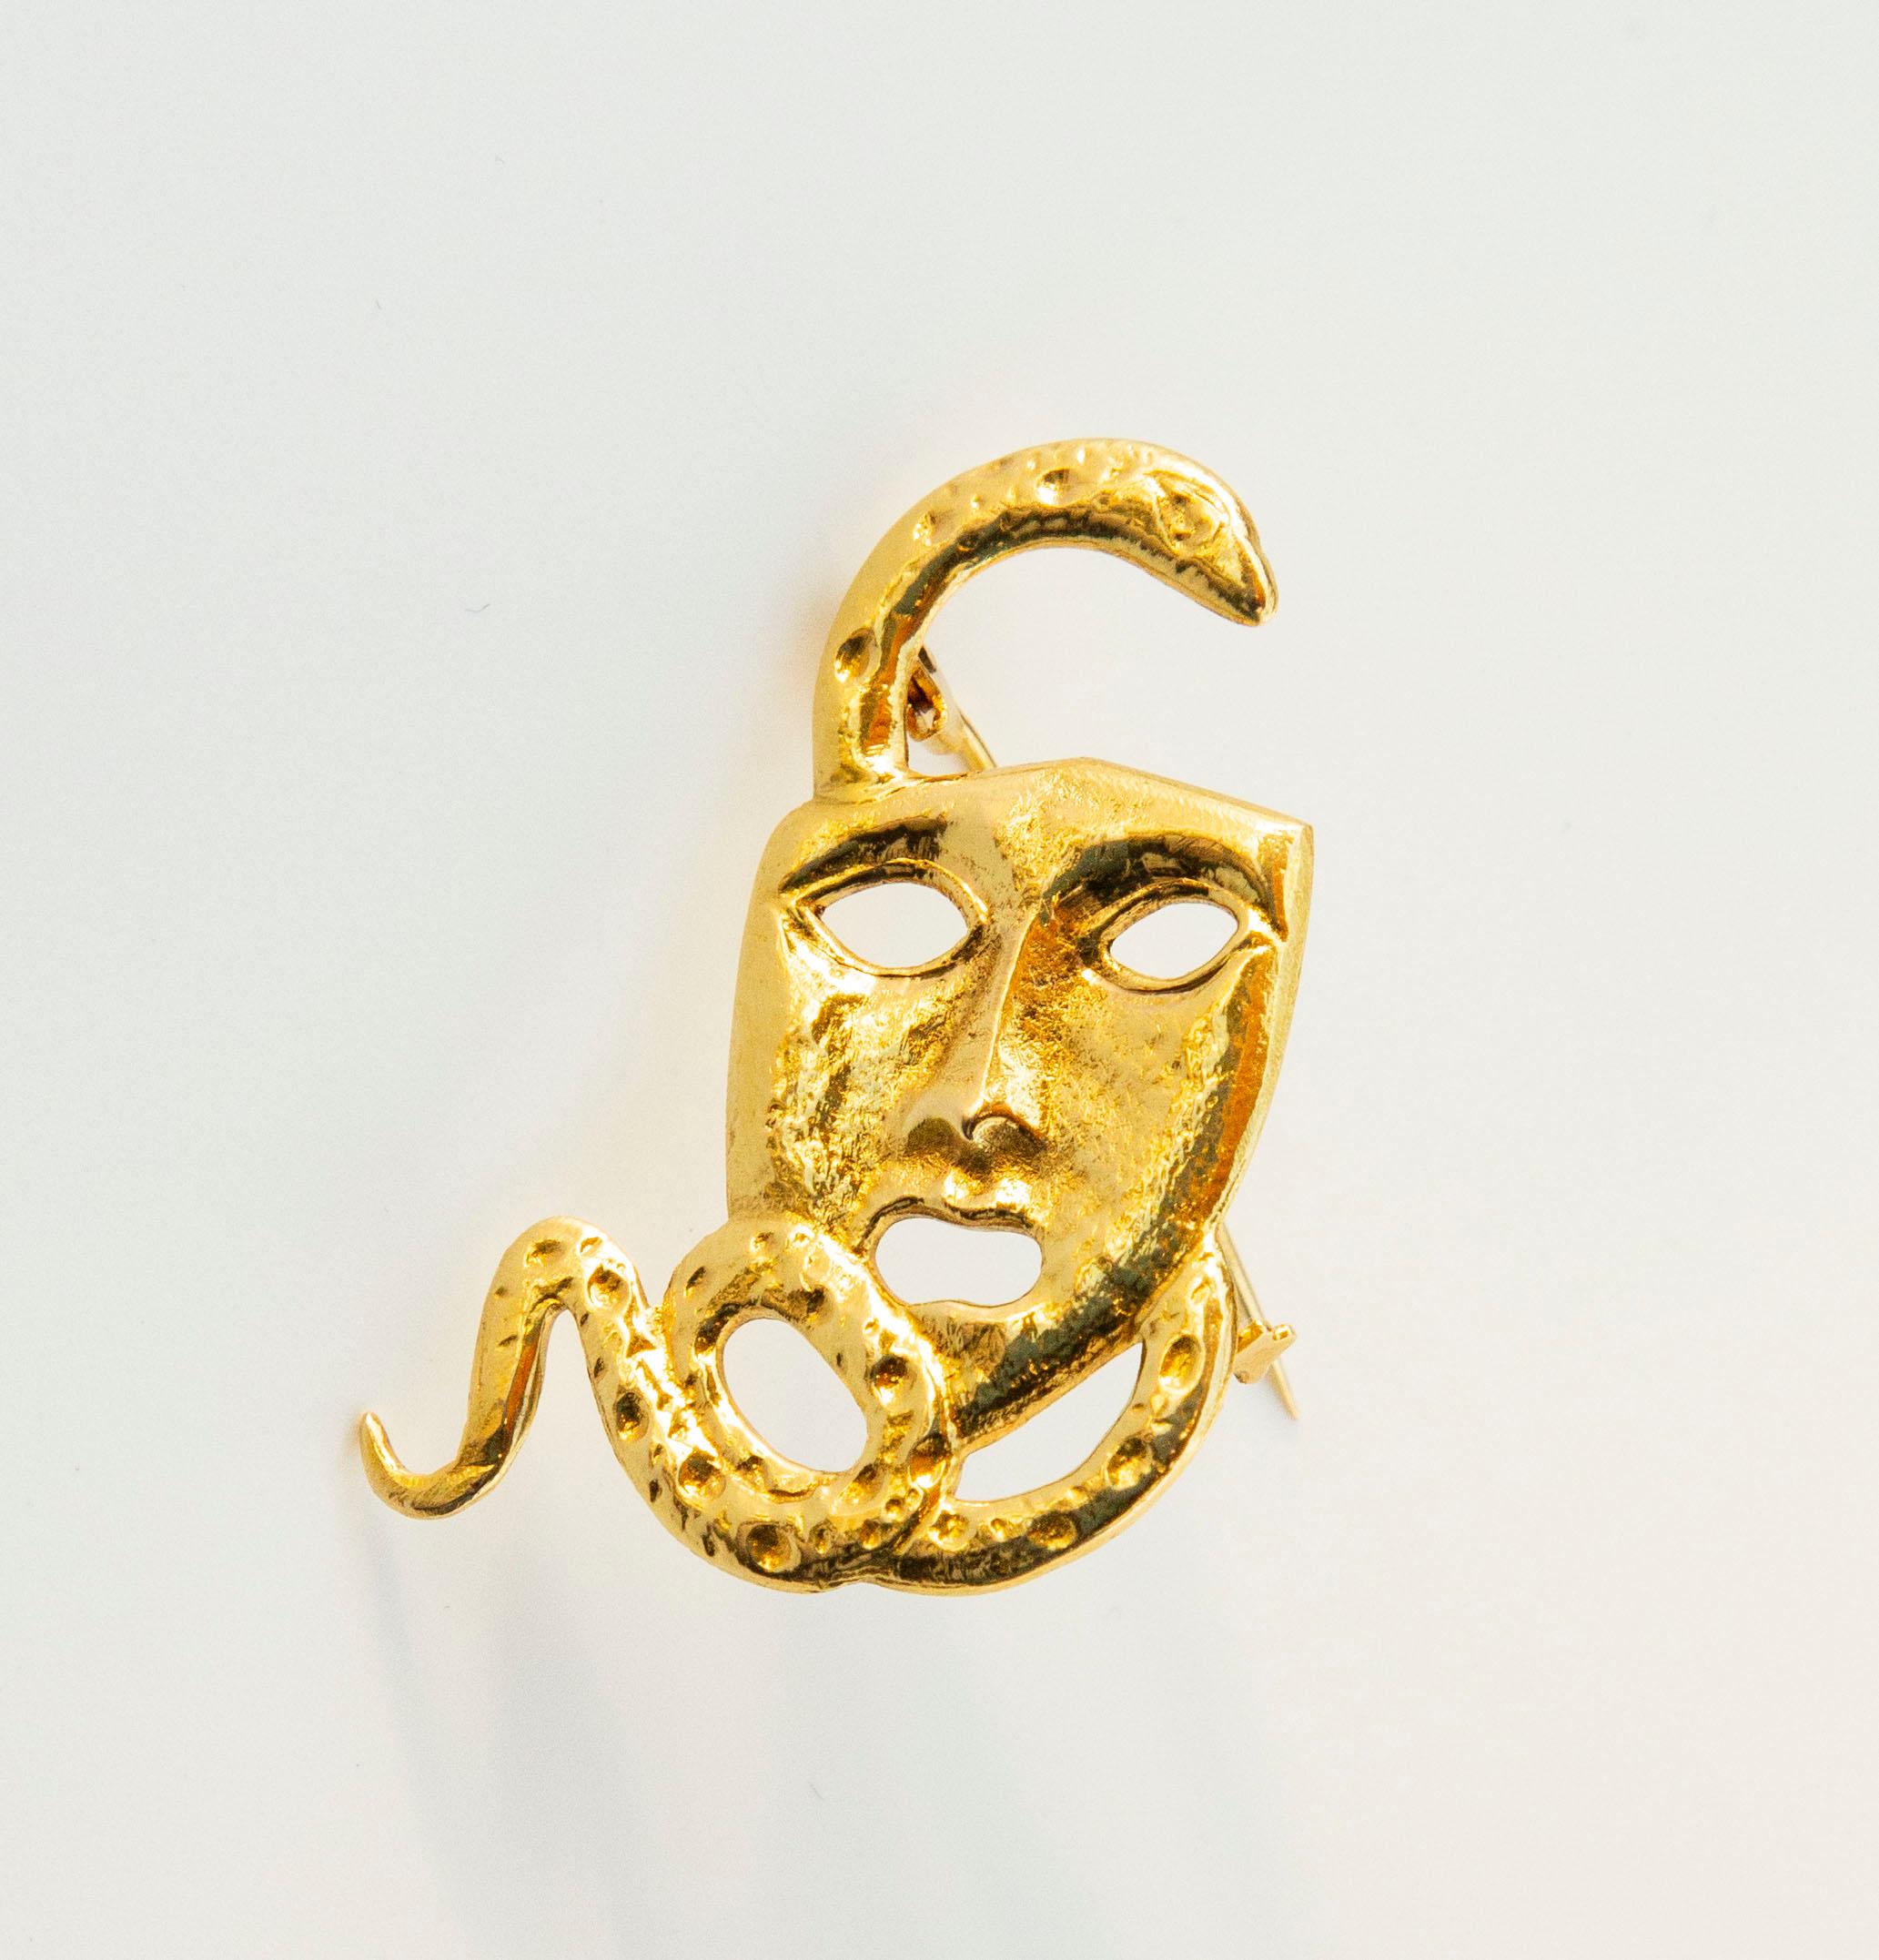 Contemporary 18 Karat Yellow Gold Brooch Designed as an Actor Drama Mask with a Snake For Sale